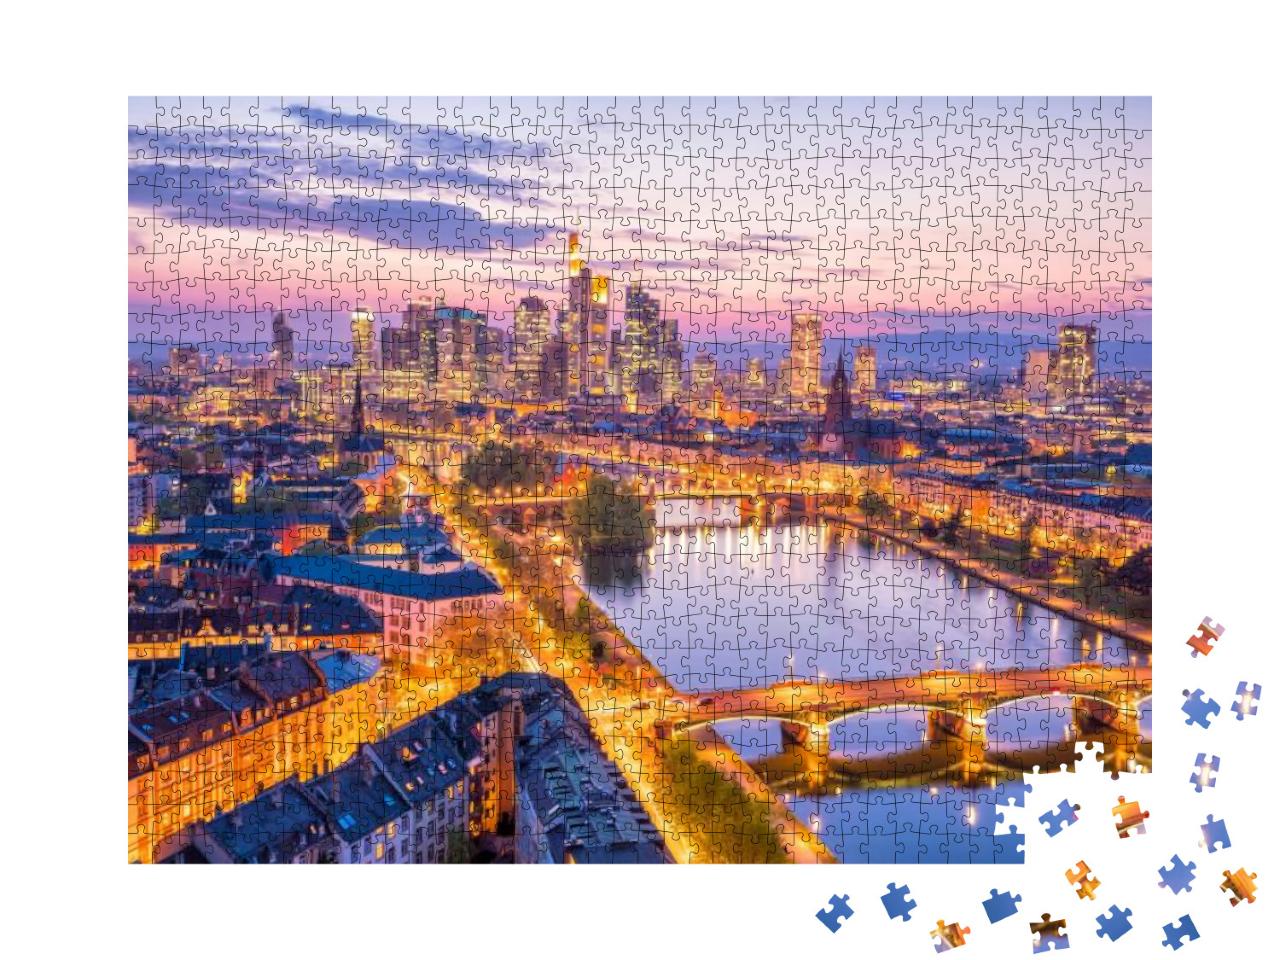 View of Frankfurt City Skyline in Germany At Twilight fro... Jigsaw Puzzle with 1000 pieces